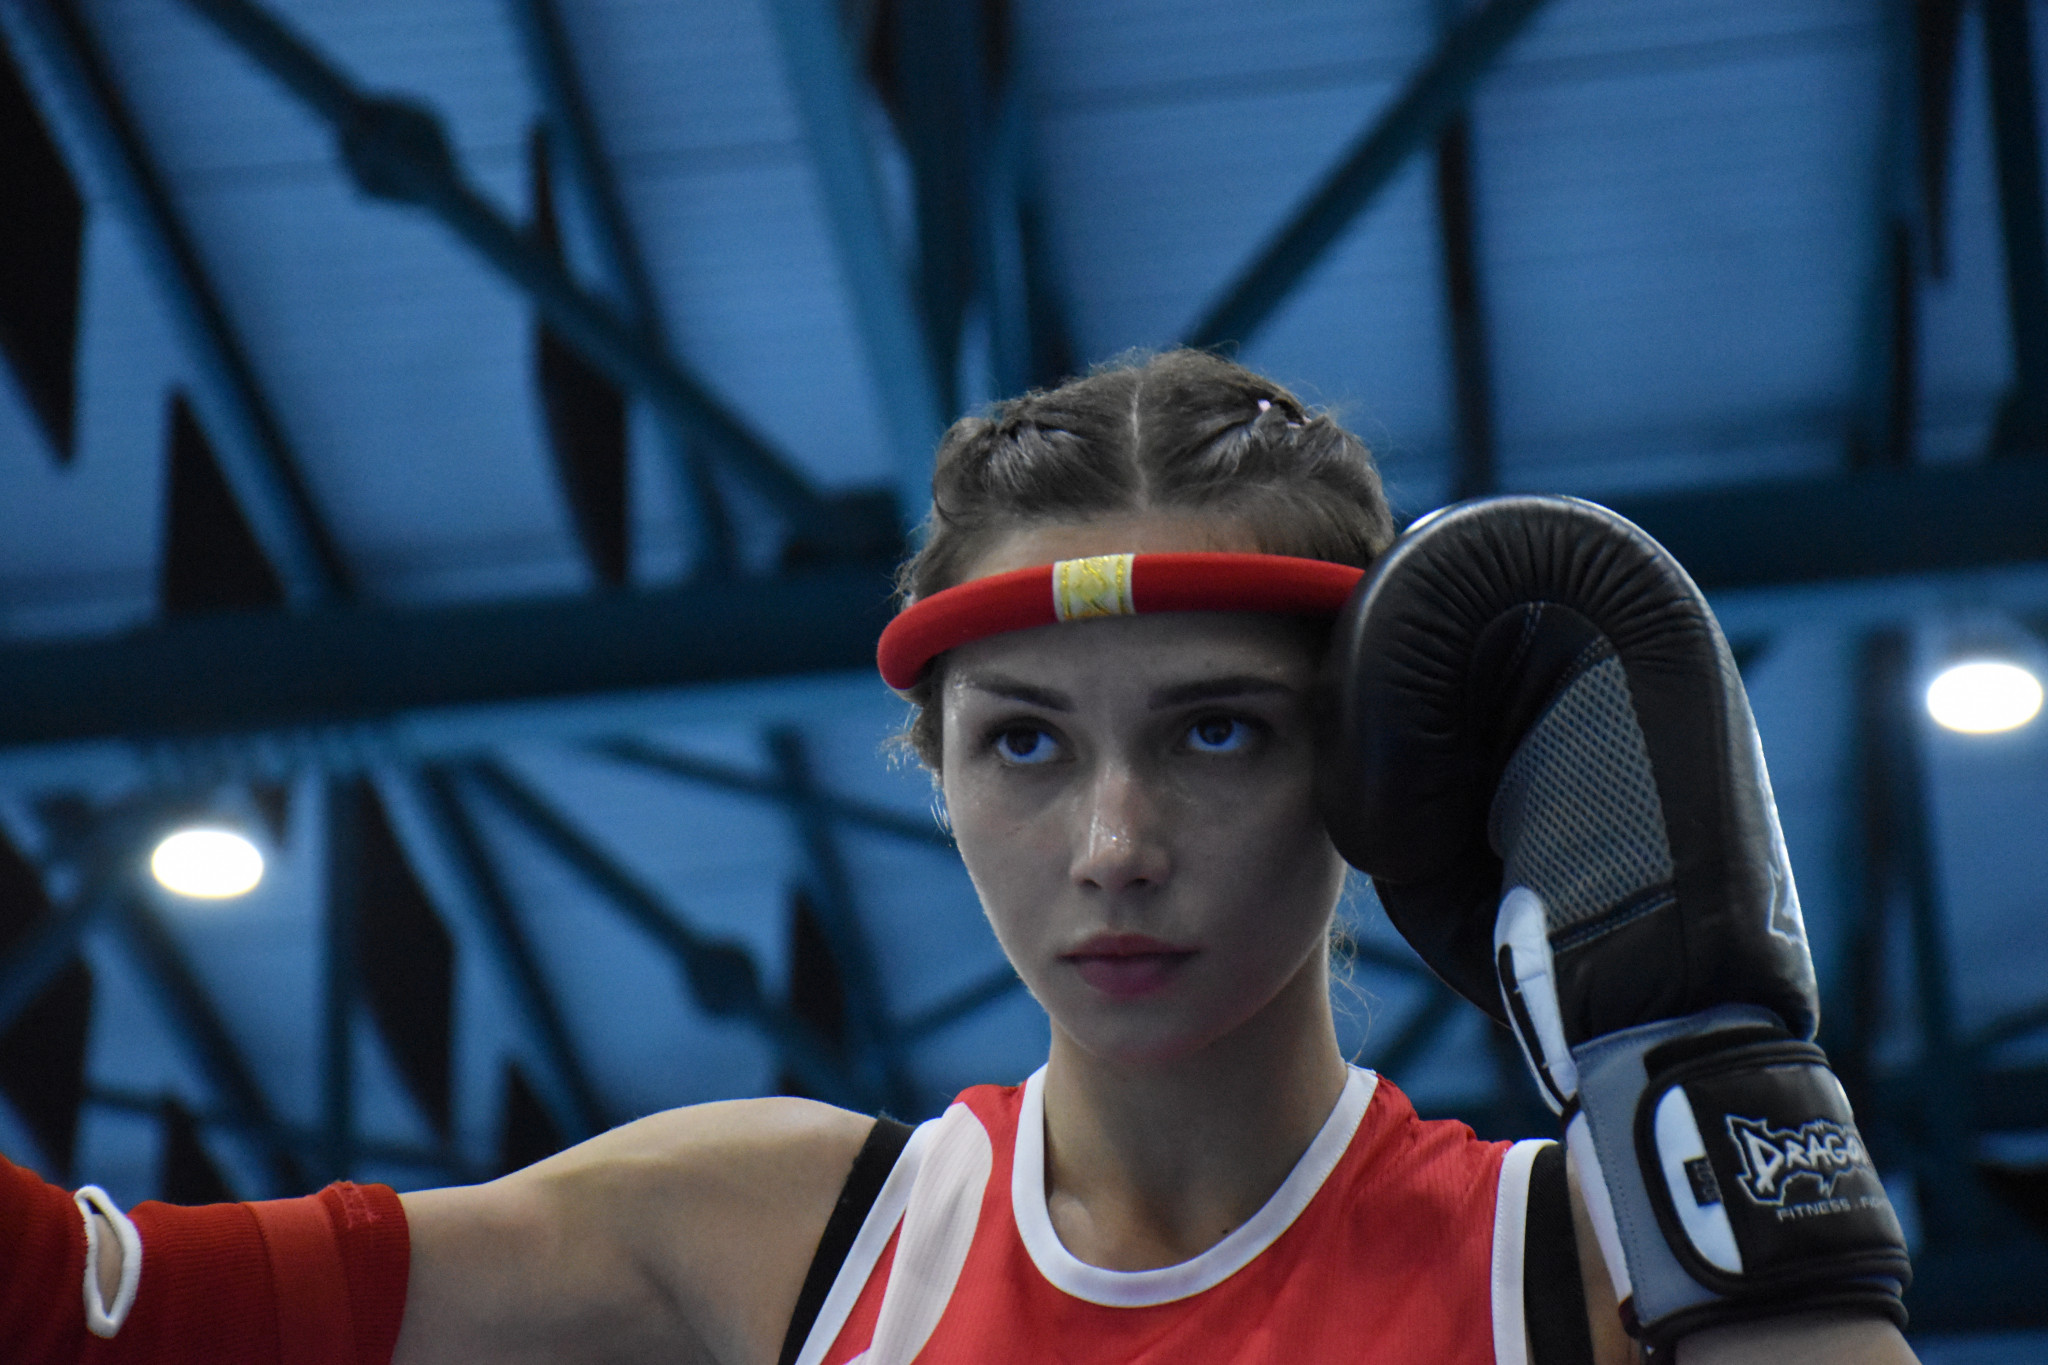 Muaythai fighters were traditional headwear as part of the pre-match ceremony ©FISU